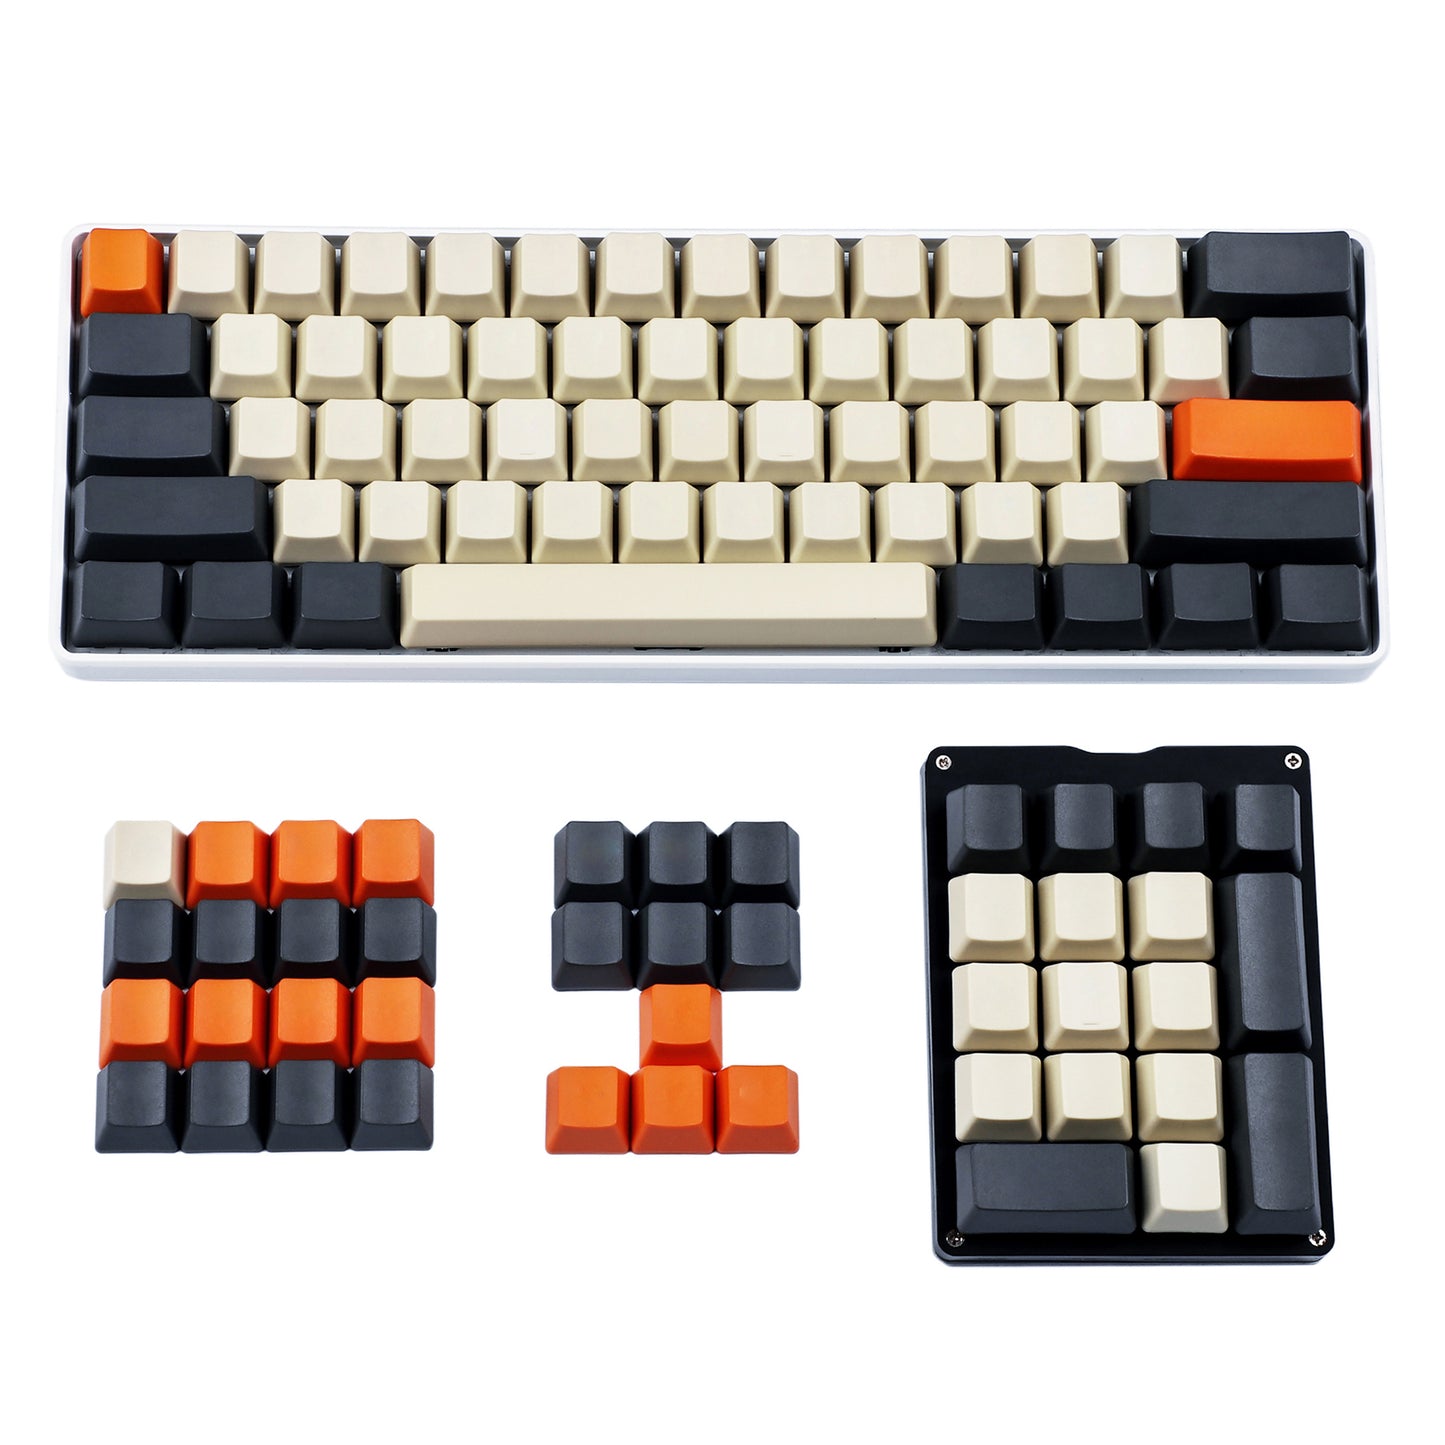 104 Carbon Blank Keycaps(OEM Profile PBT 1.5mm Thickness)